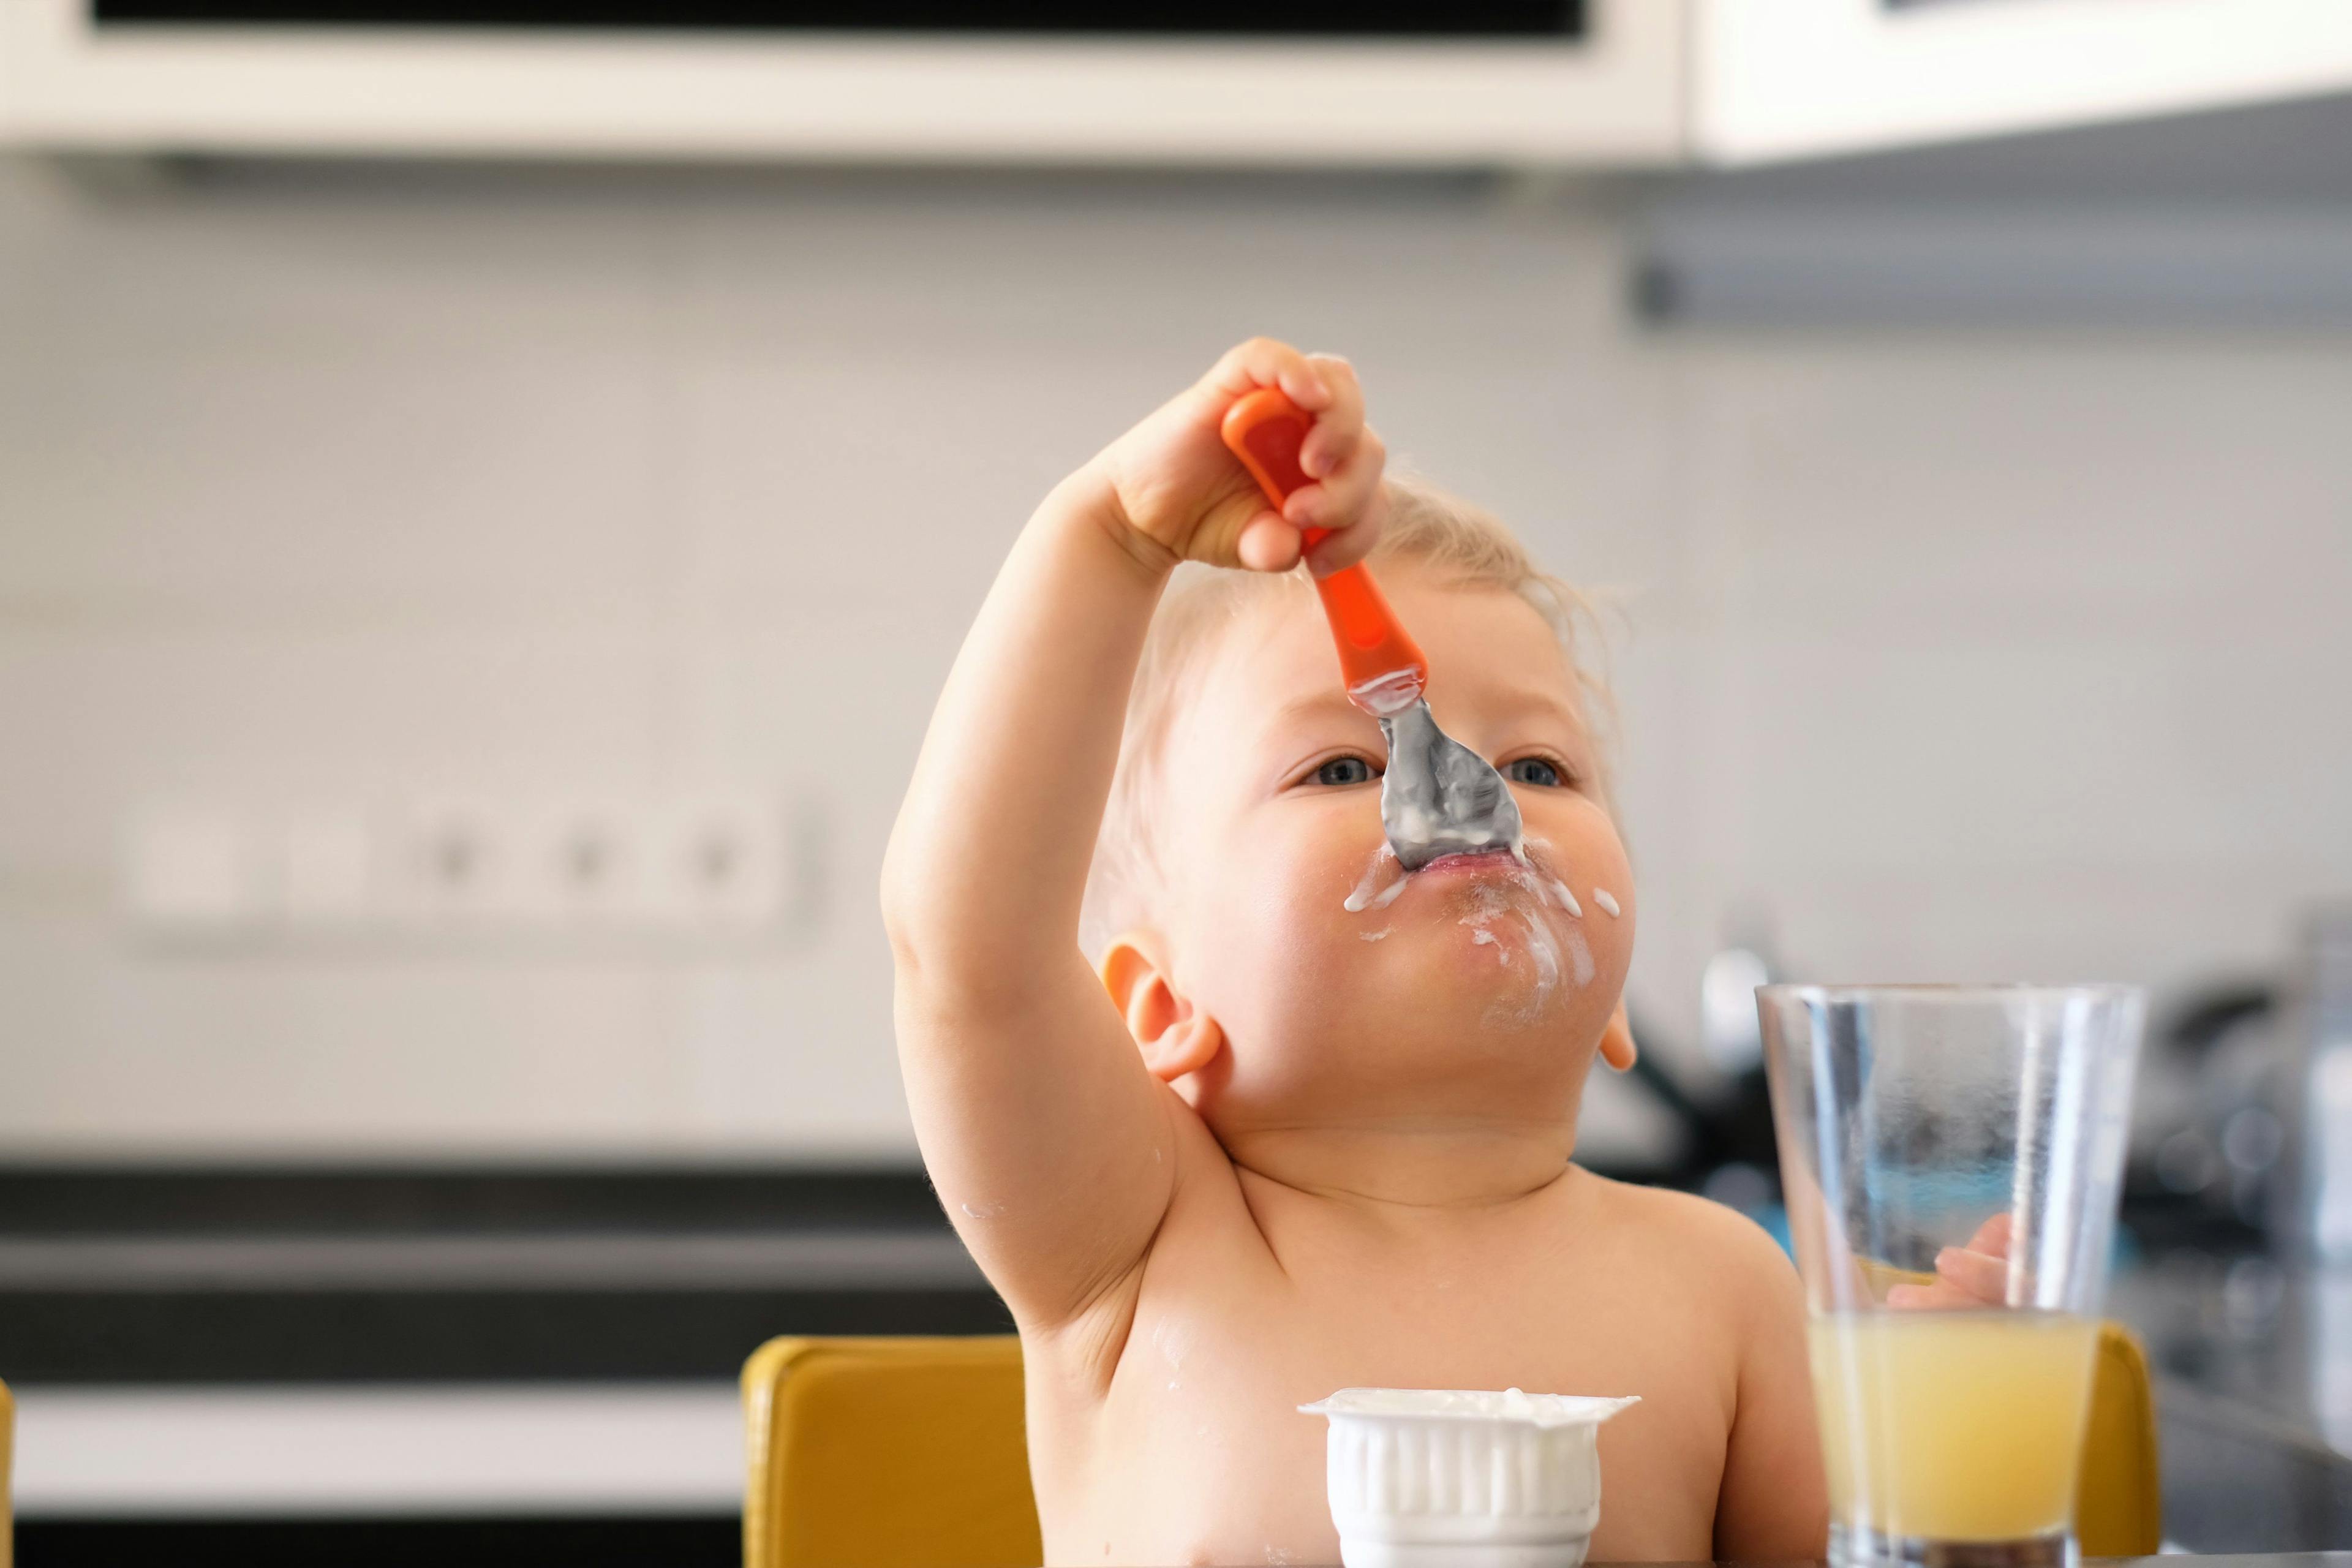 Baby-led weaning: Introducing complementary foods in infancy